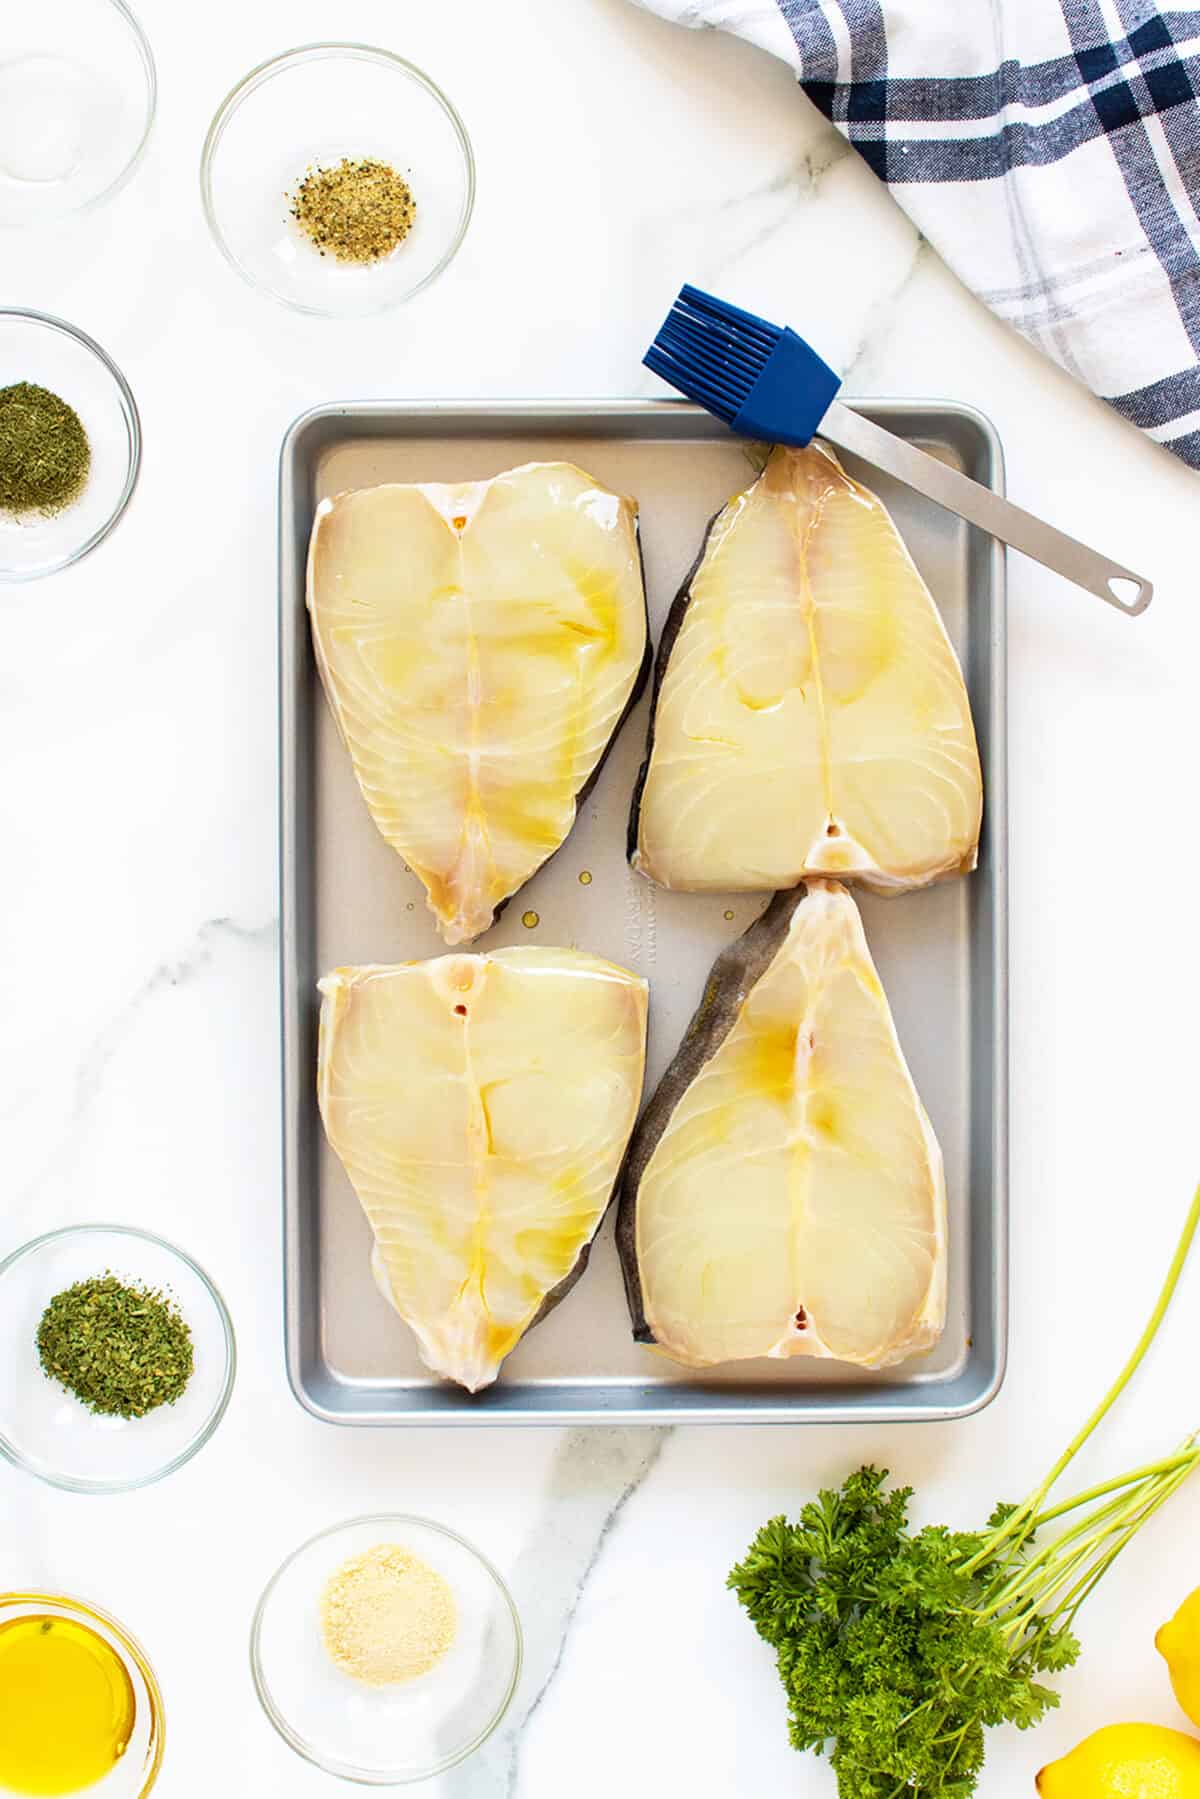 Grilled halibut oiled on a baking sheet